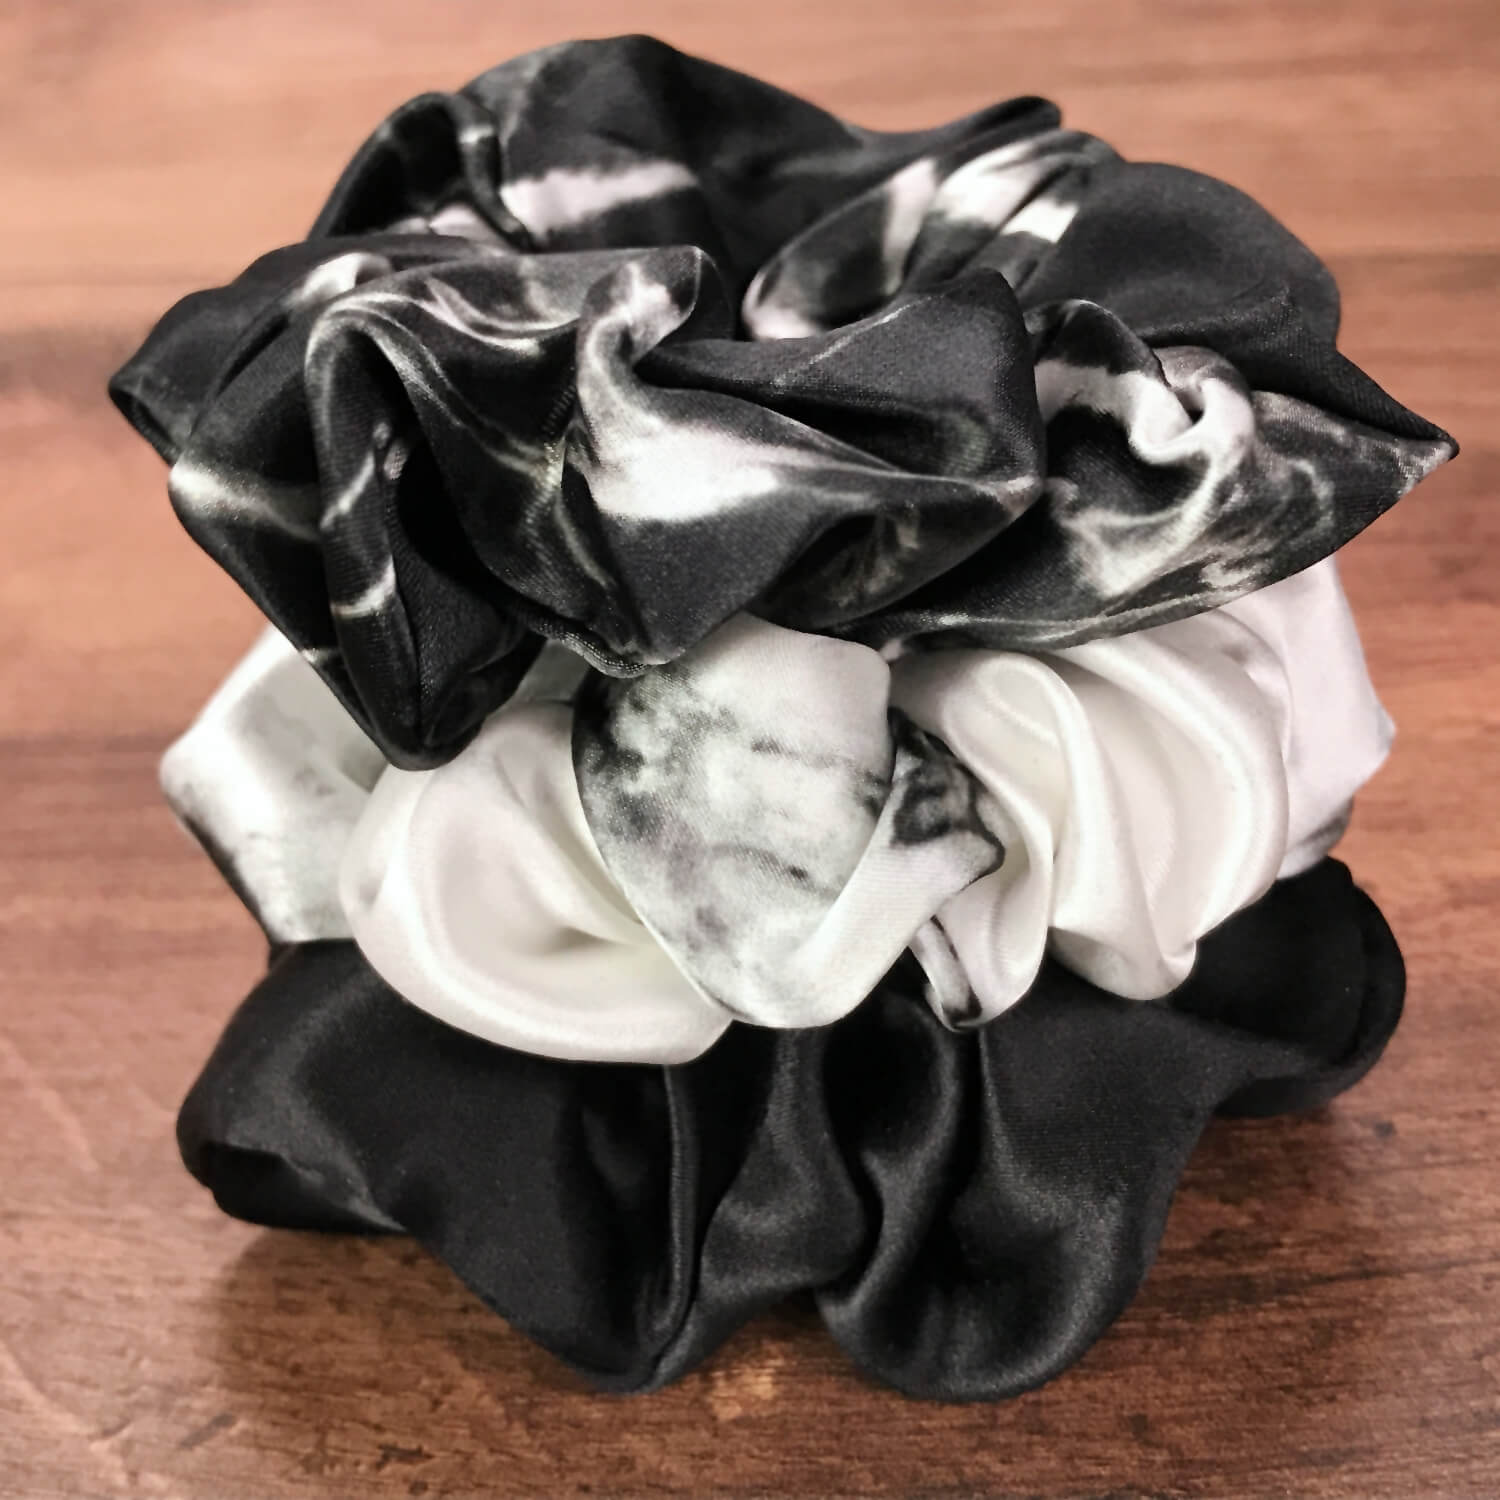 Wholesale Printed Pure Silk Twilly Hair Tie for Women Mulberry Silk  Scrunchie Suppliers -Sino